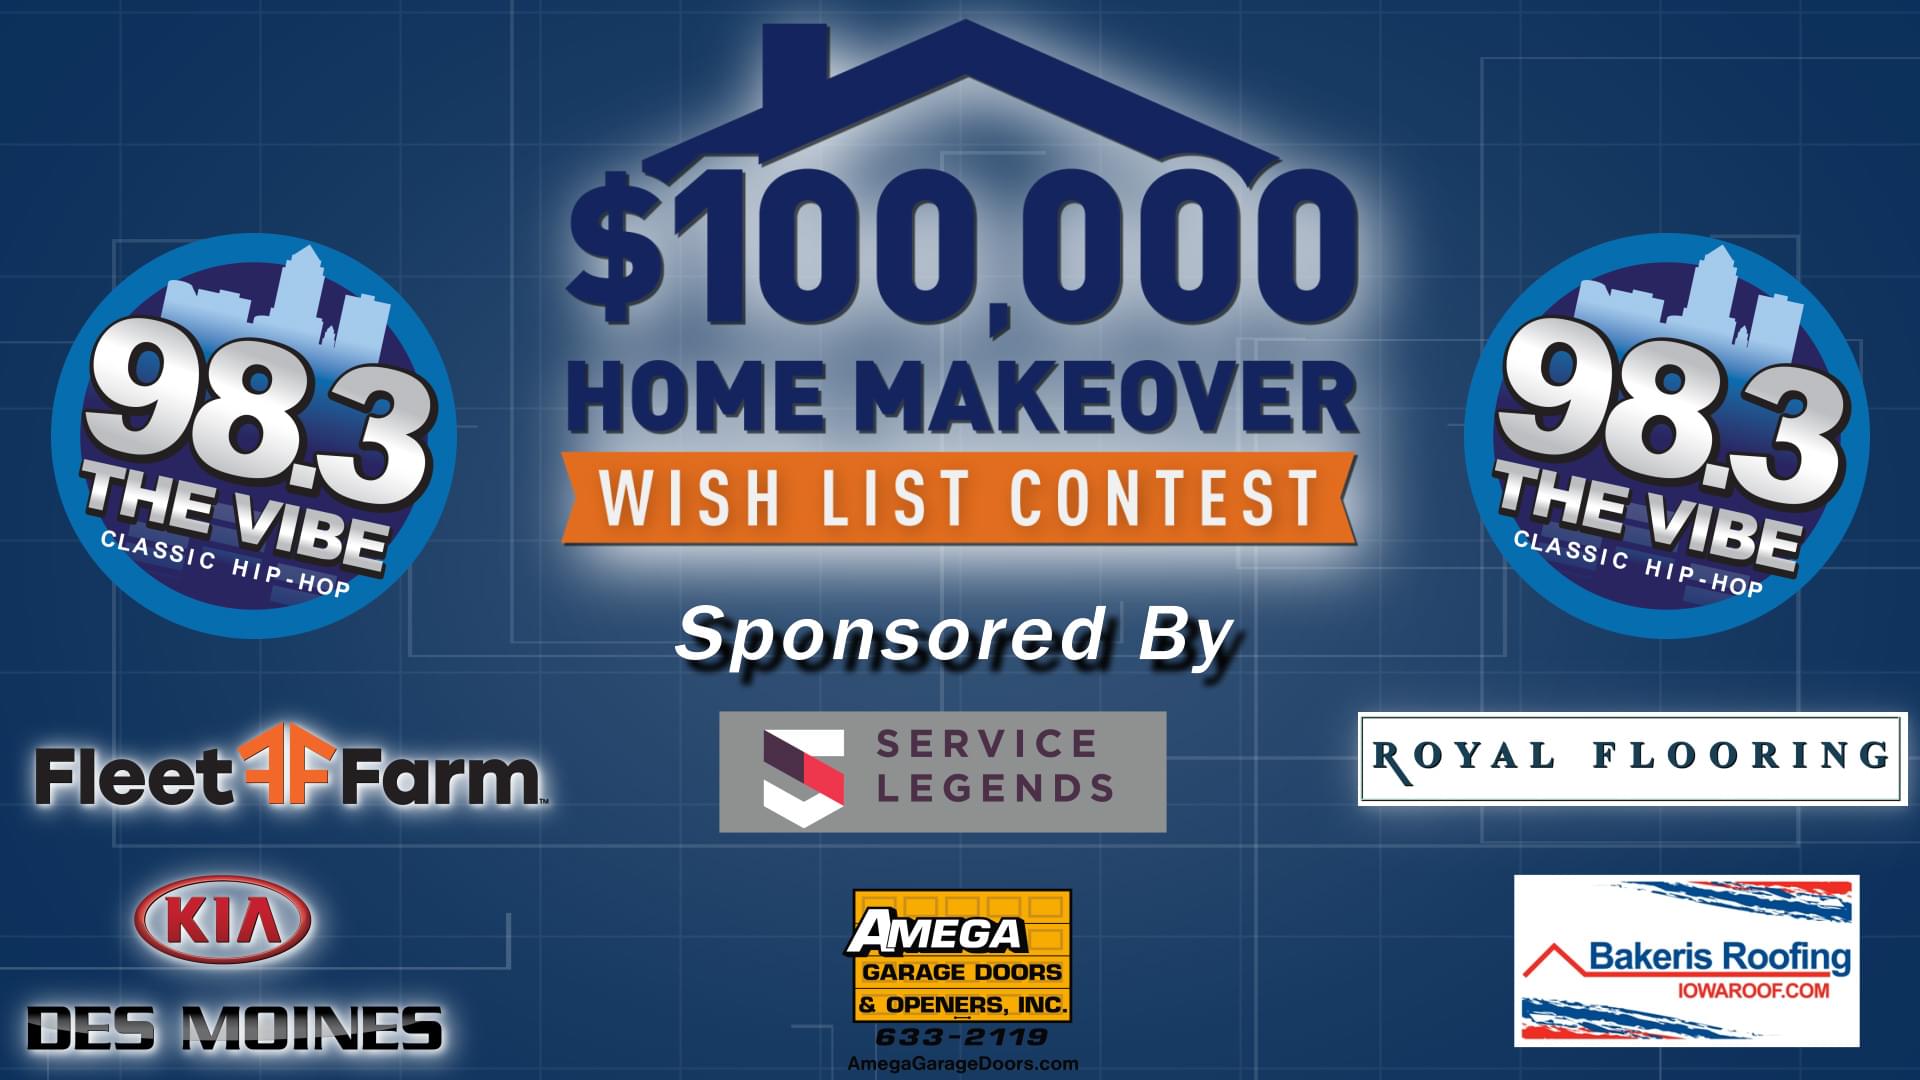 Home Makeover Wish List Contest